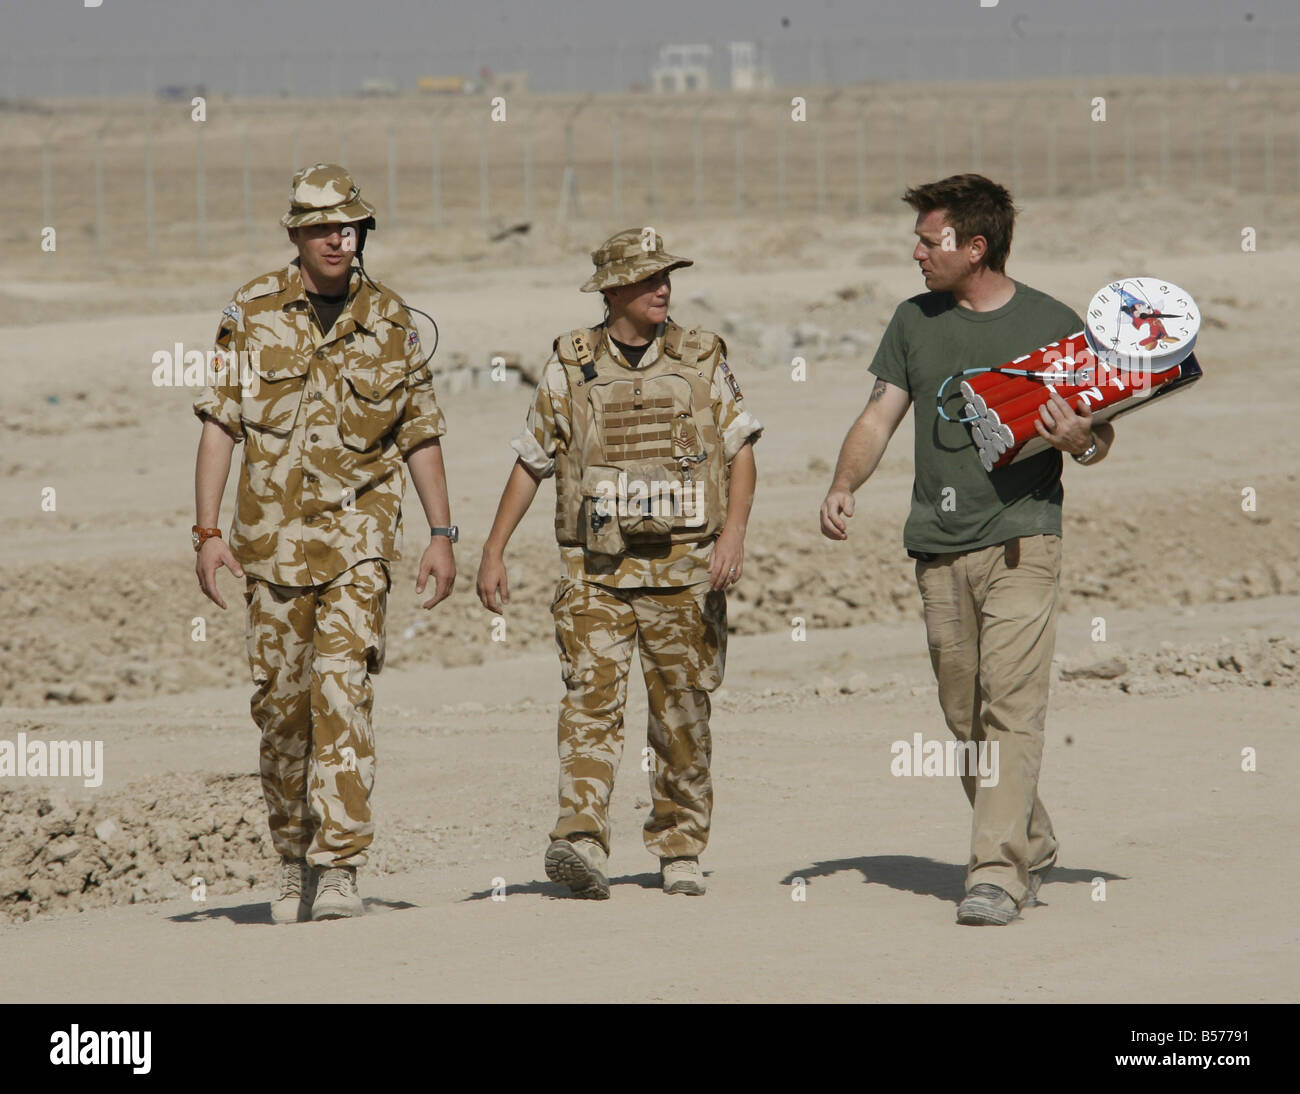 Pride Of Britain Awards Ewan McGregor t shirt with soldiers the Joint EOD explosive Ordanance Division group at Basrah Iraq Stock Photo